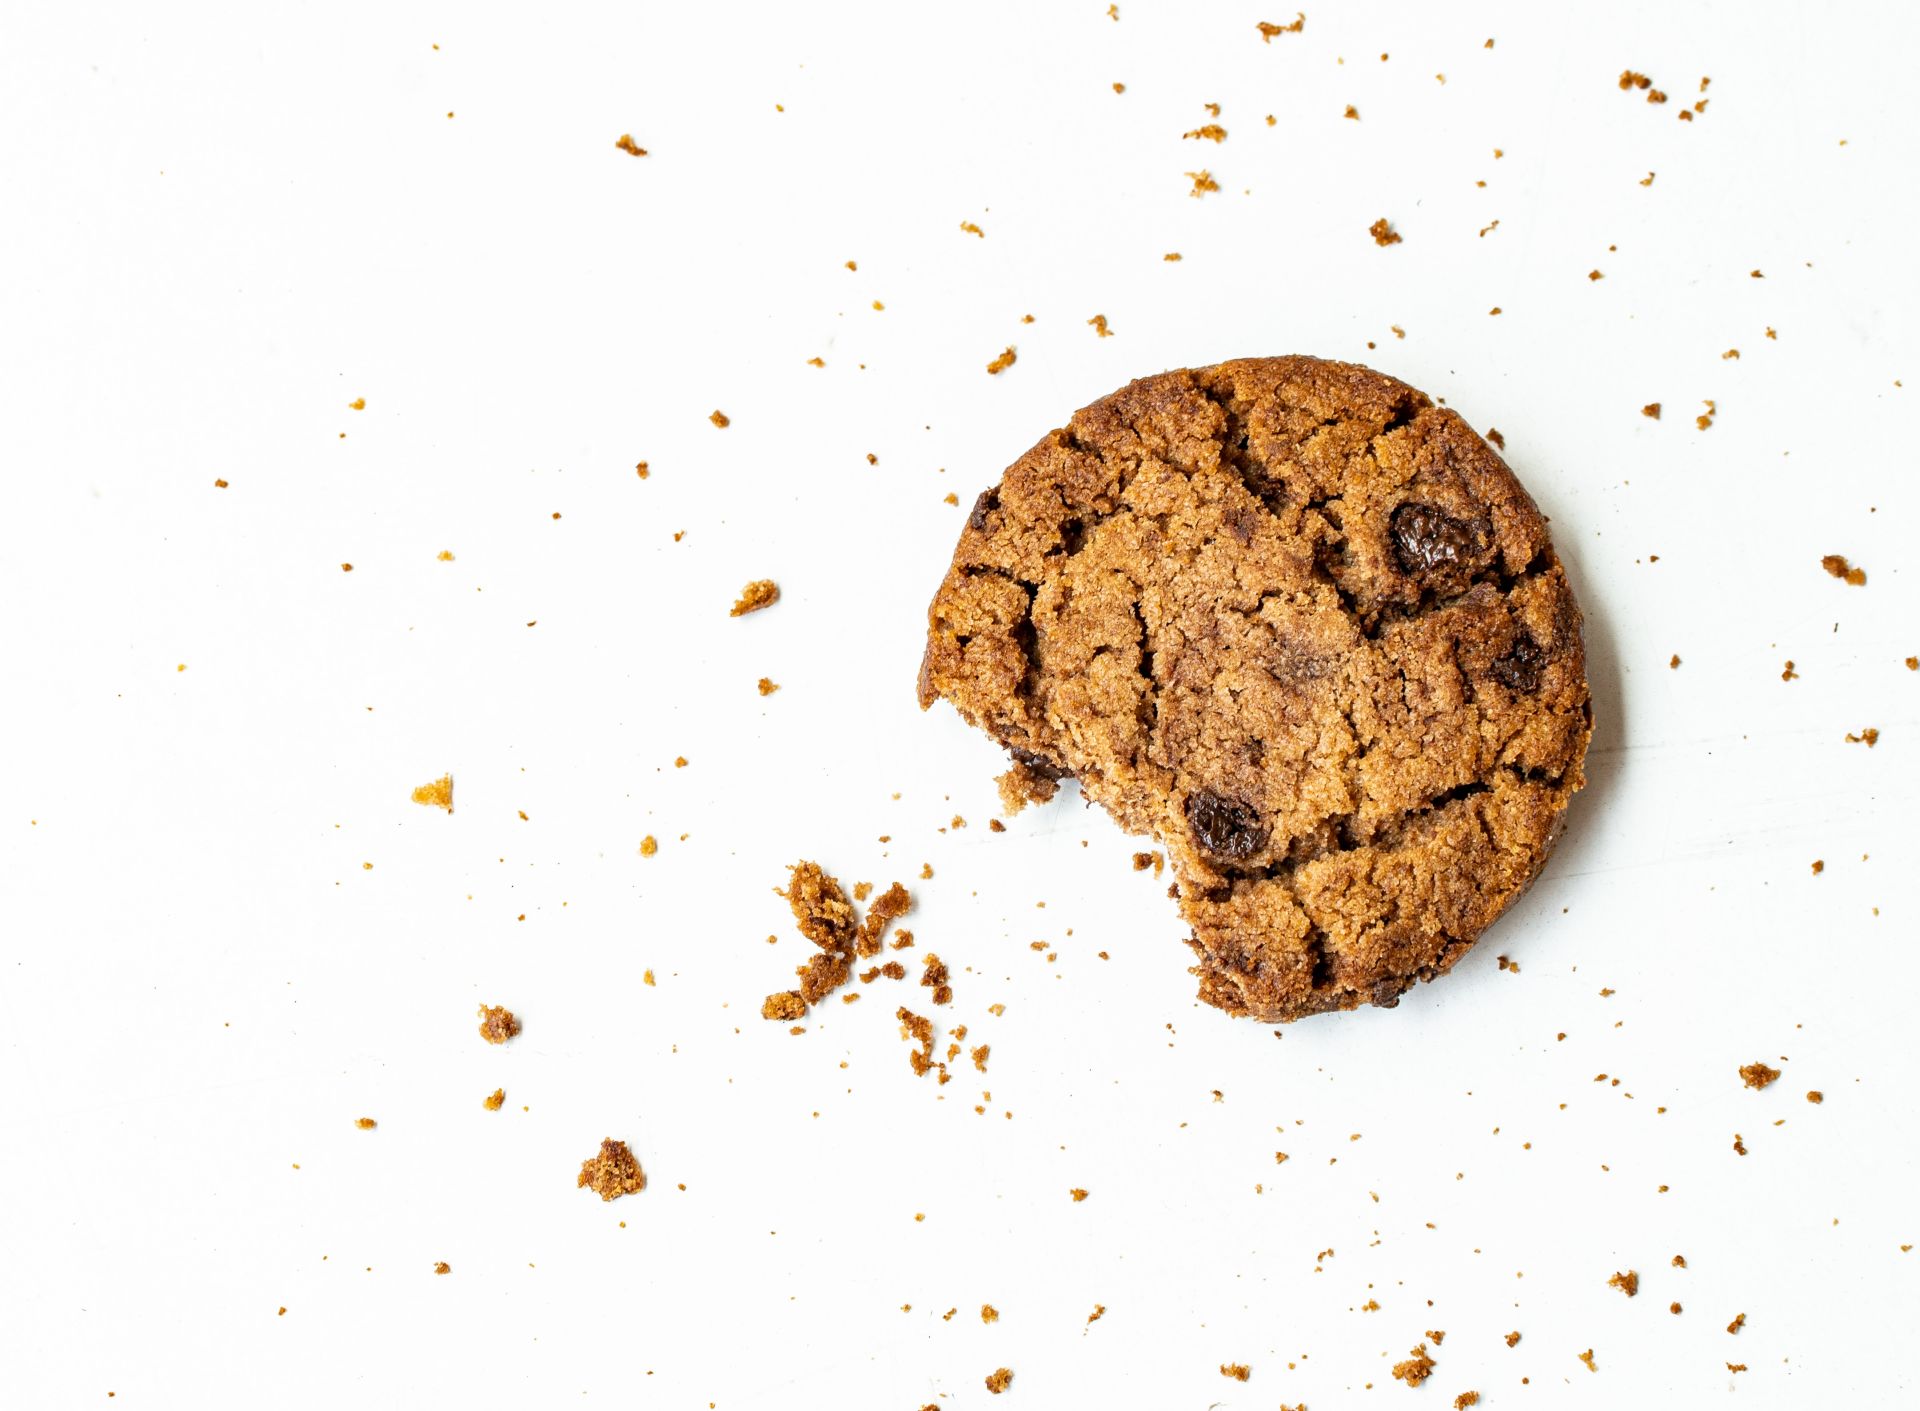 30% less revenue, 100% more privacy with Google's new cookie policy